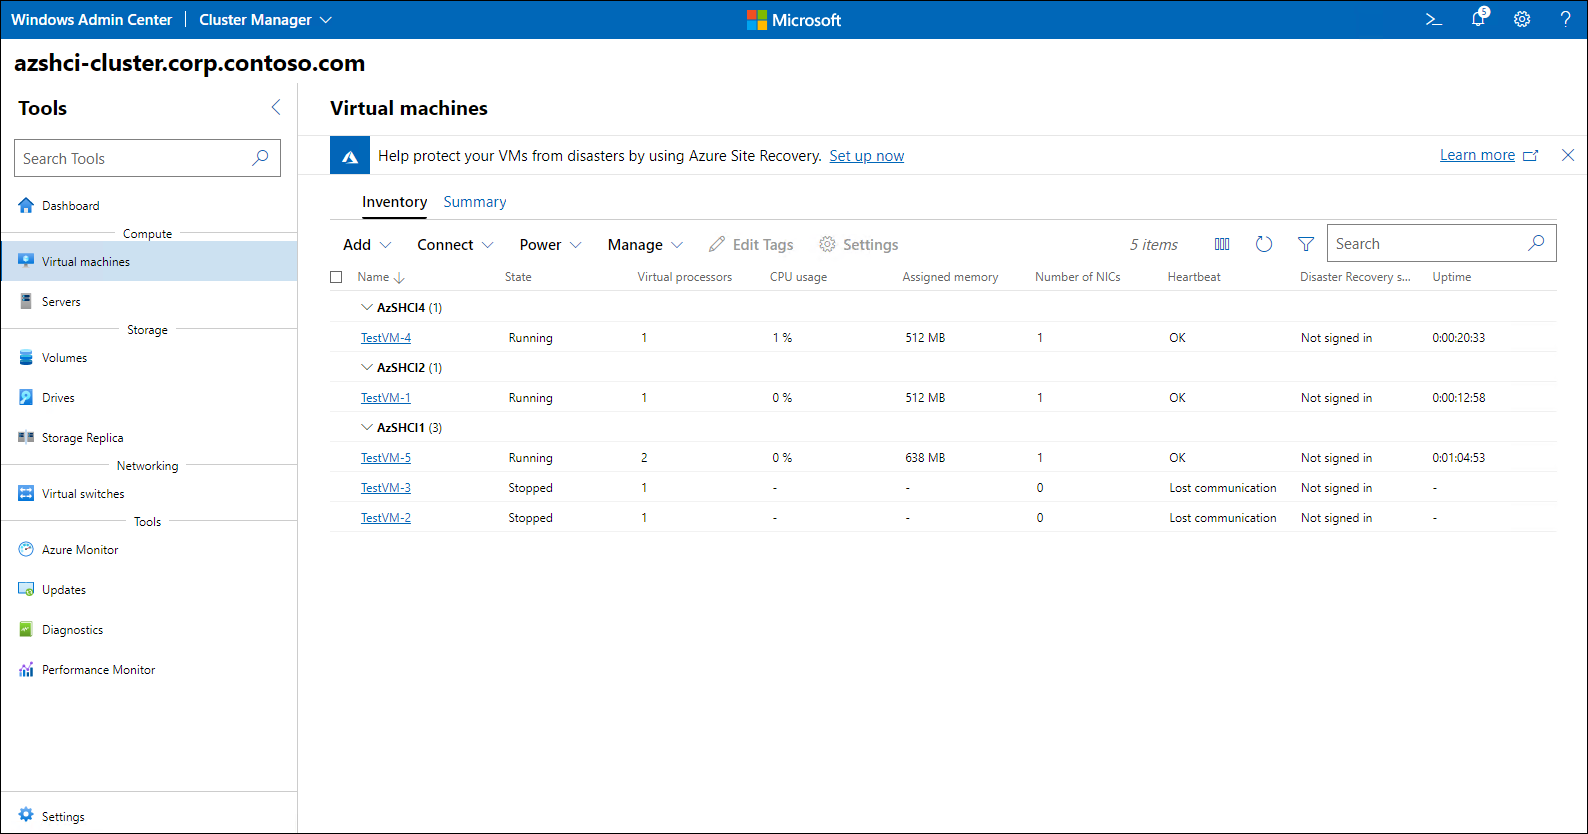 The screenshot depicts the Windows Admin Center dashboard displaying information about the status and performance of clustered VMs.